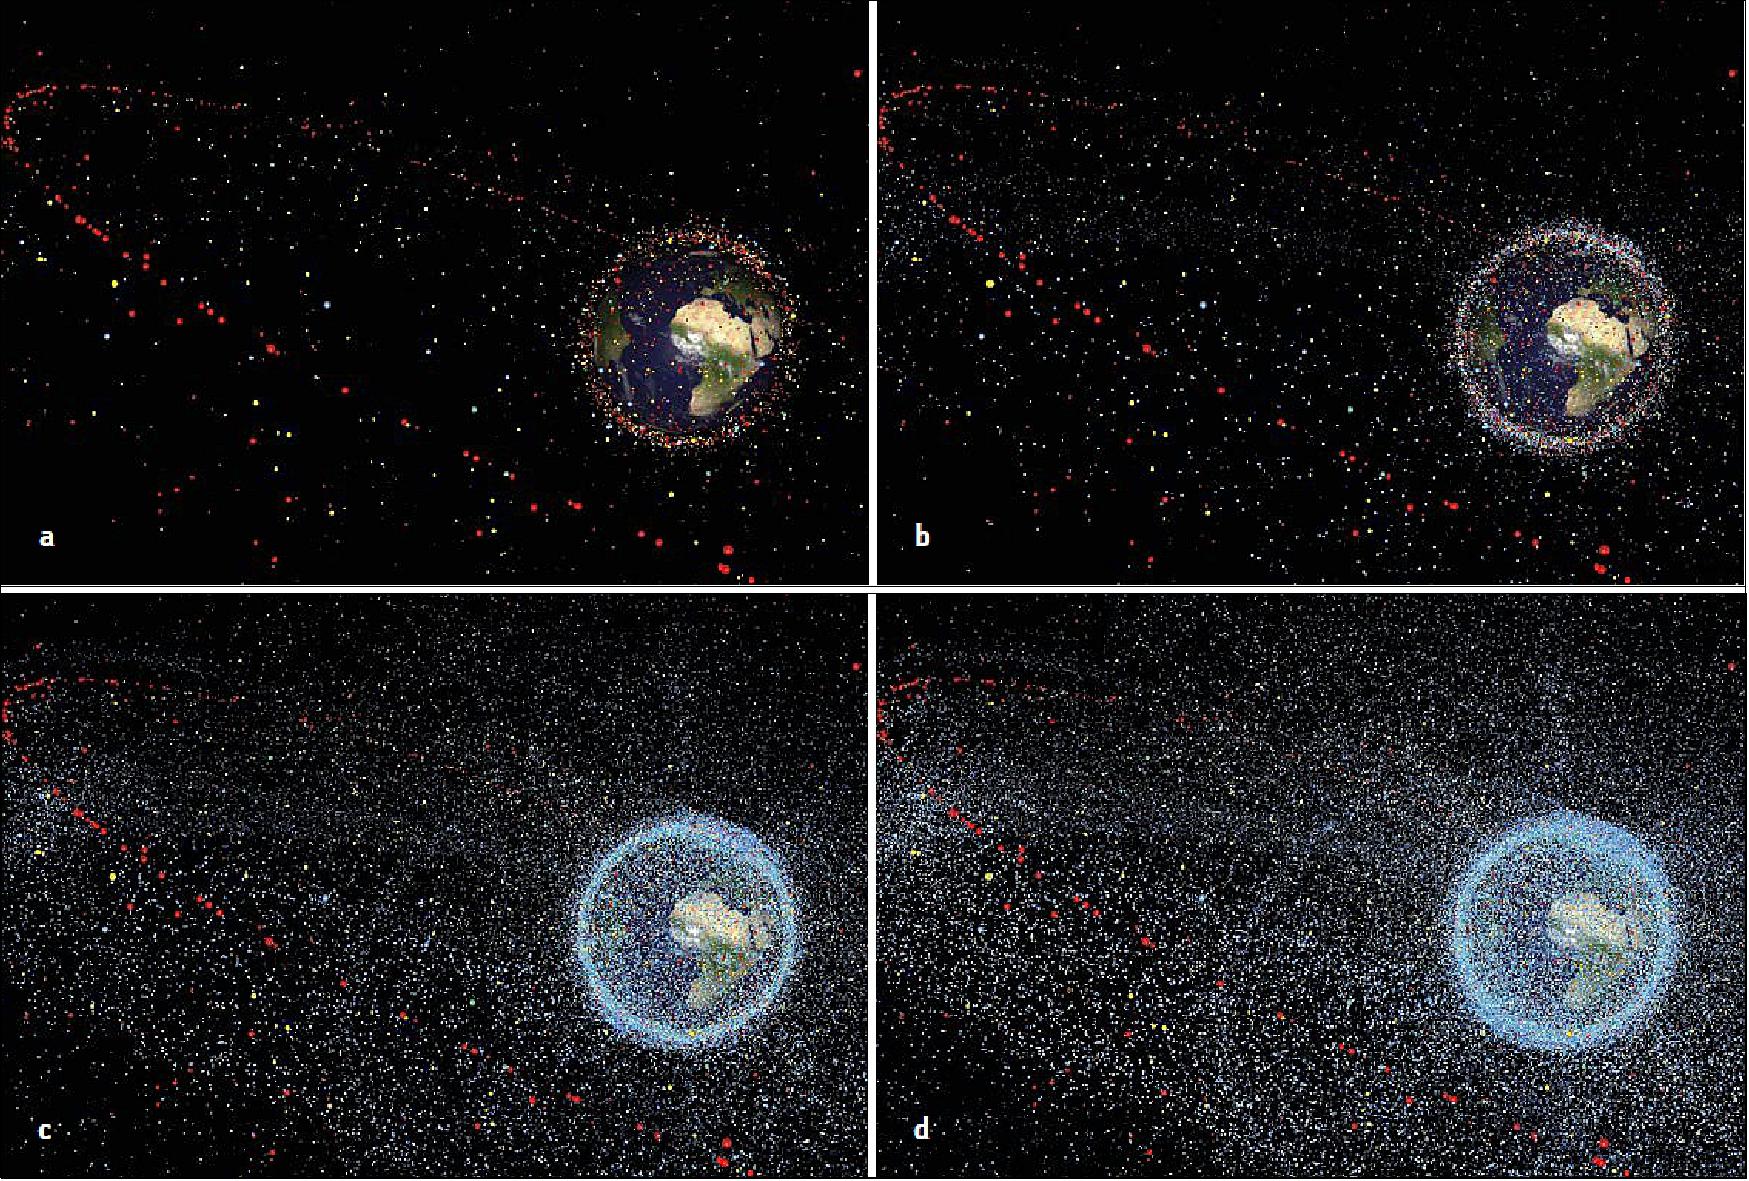 Figure 33: Modelled space debris population for objects >1 m (a), > 10 cm (b), >1 cm (c), and >1 mm (d). The sizes of debris are exaggerated in relation to Earth. Figure 32 statistics translated into Figure 33. Red: intact satellites (inactive or active), yellow: upper stages, green: mission-related objects, blue: fragments (ESA MASTER model)